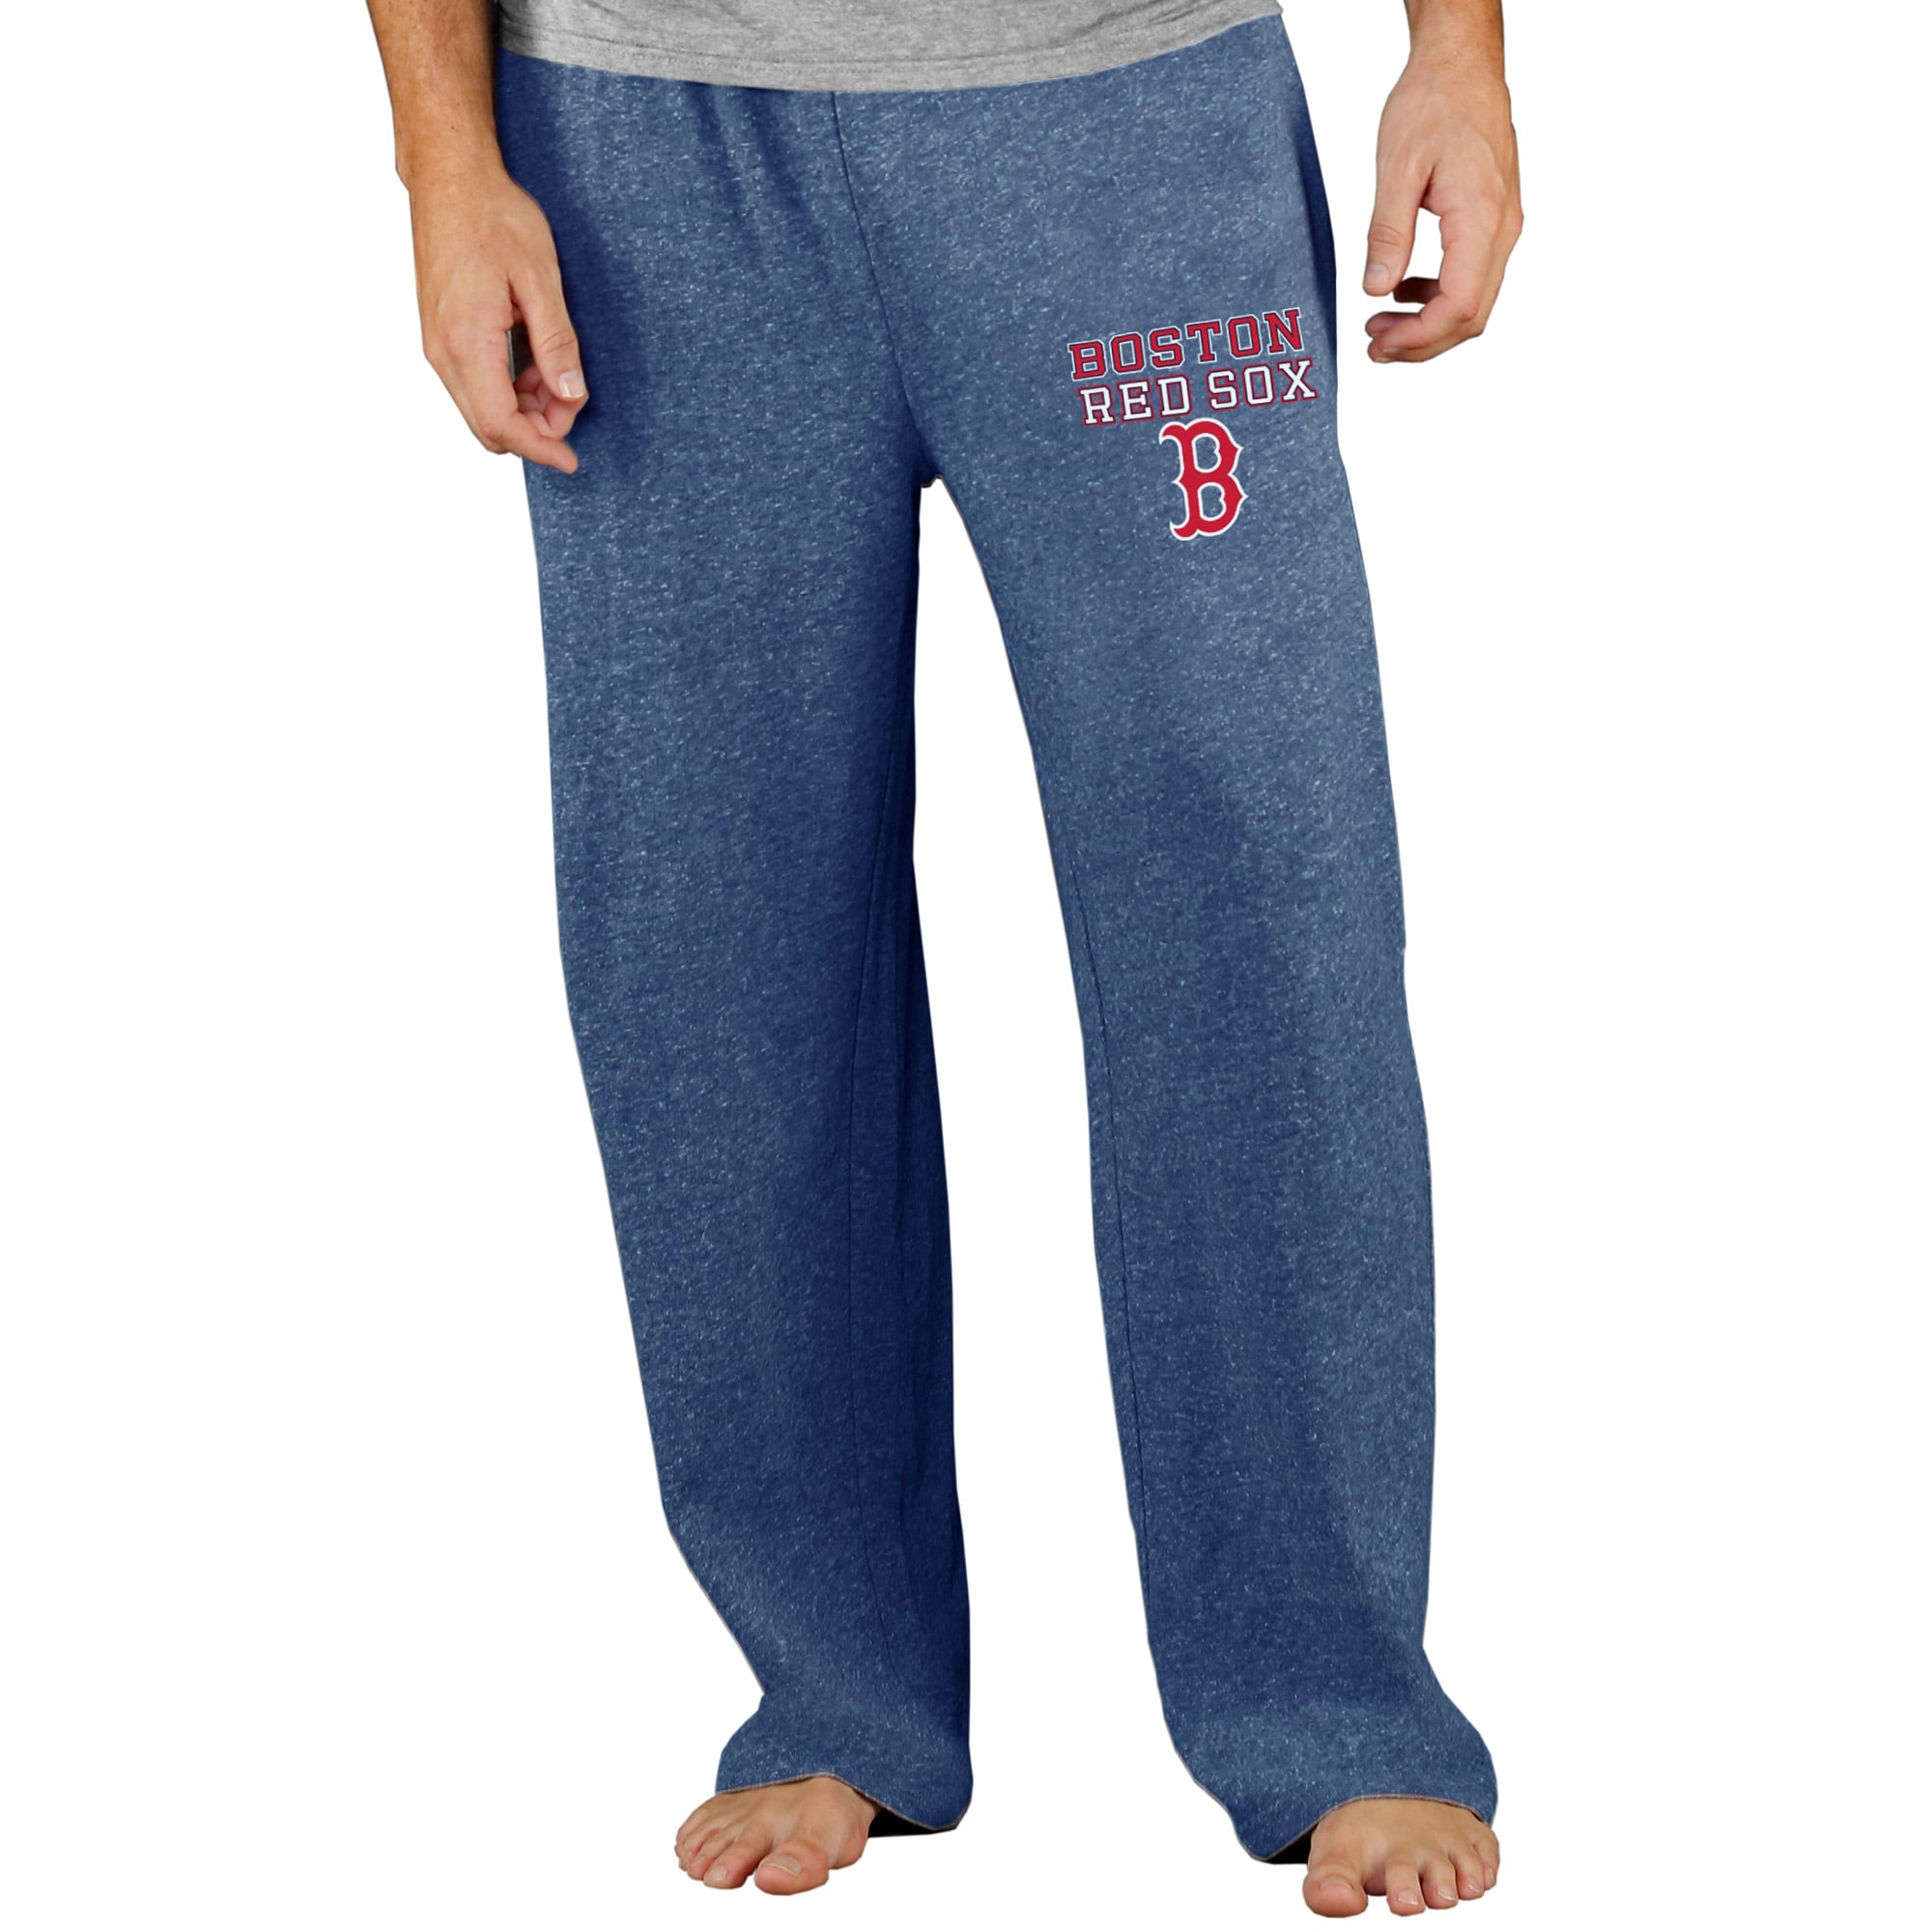 Men's Concepts Sport Navy Boston Red Sox Team Mainstream Terry Pants - image 1 of 1